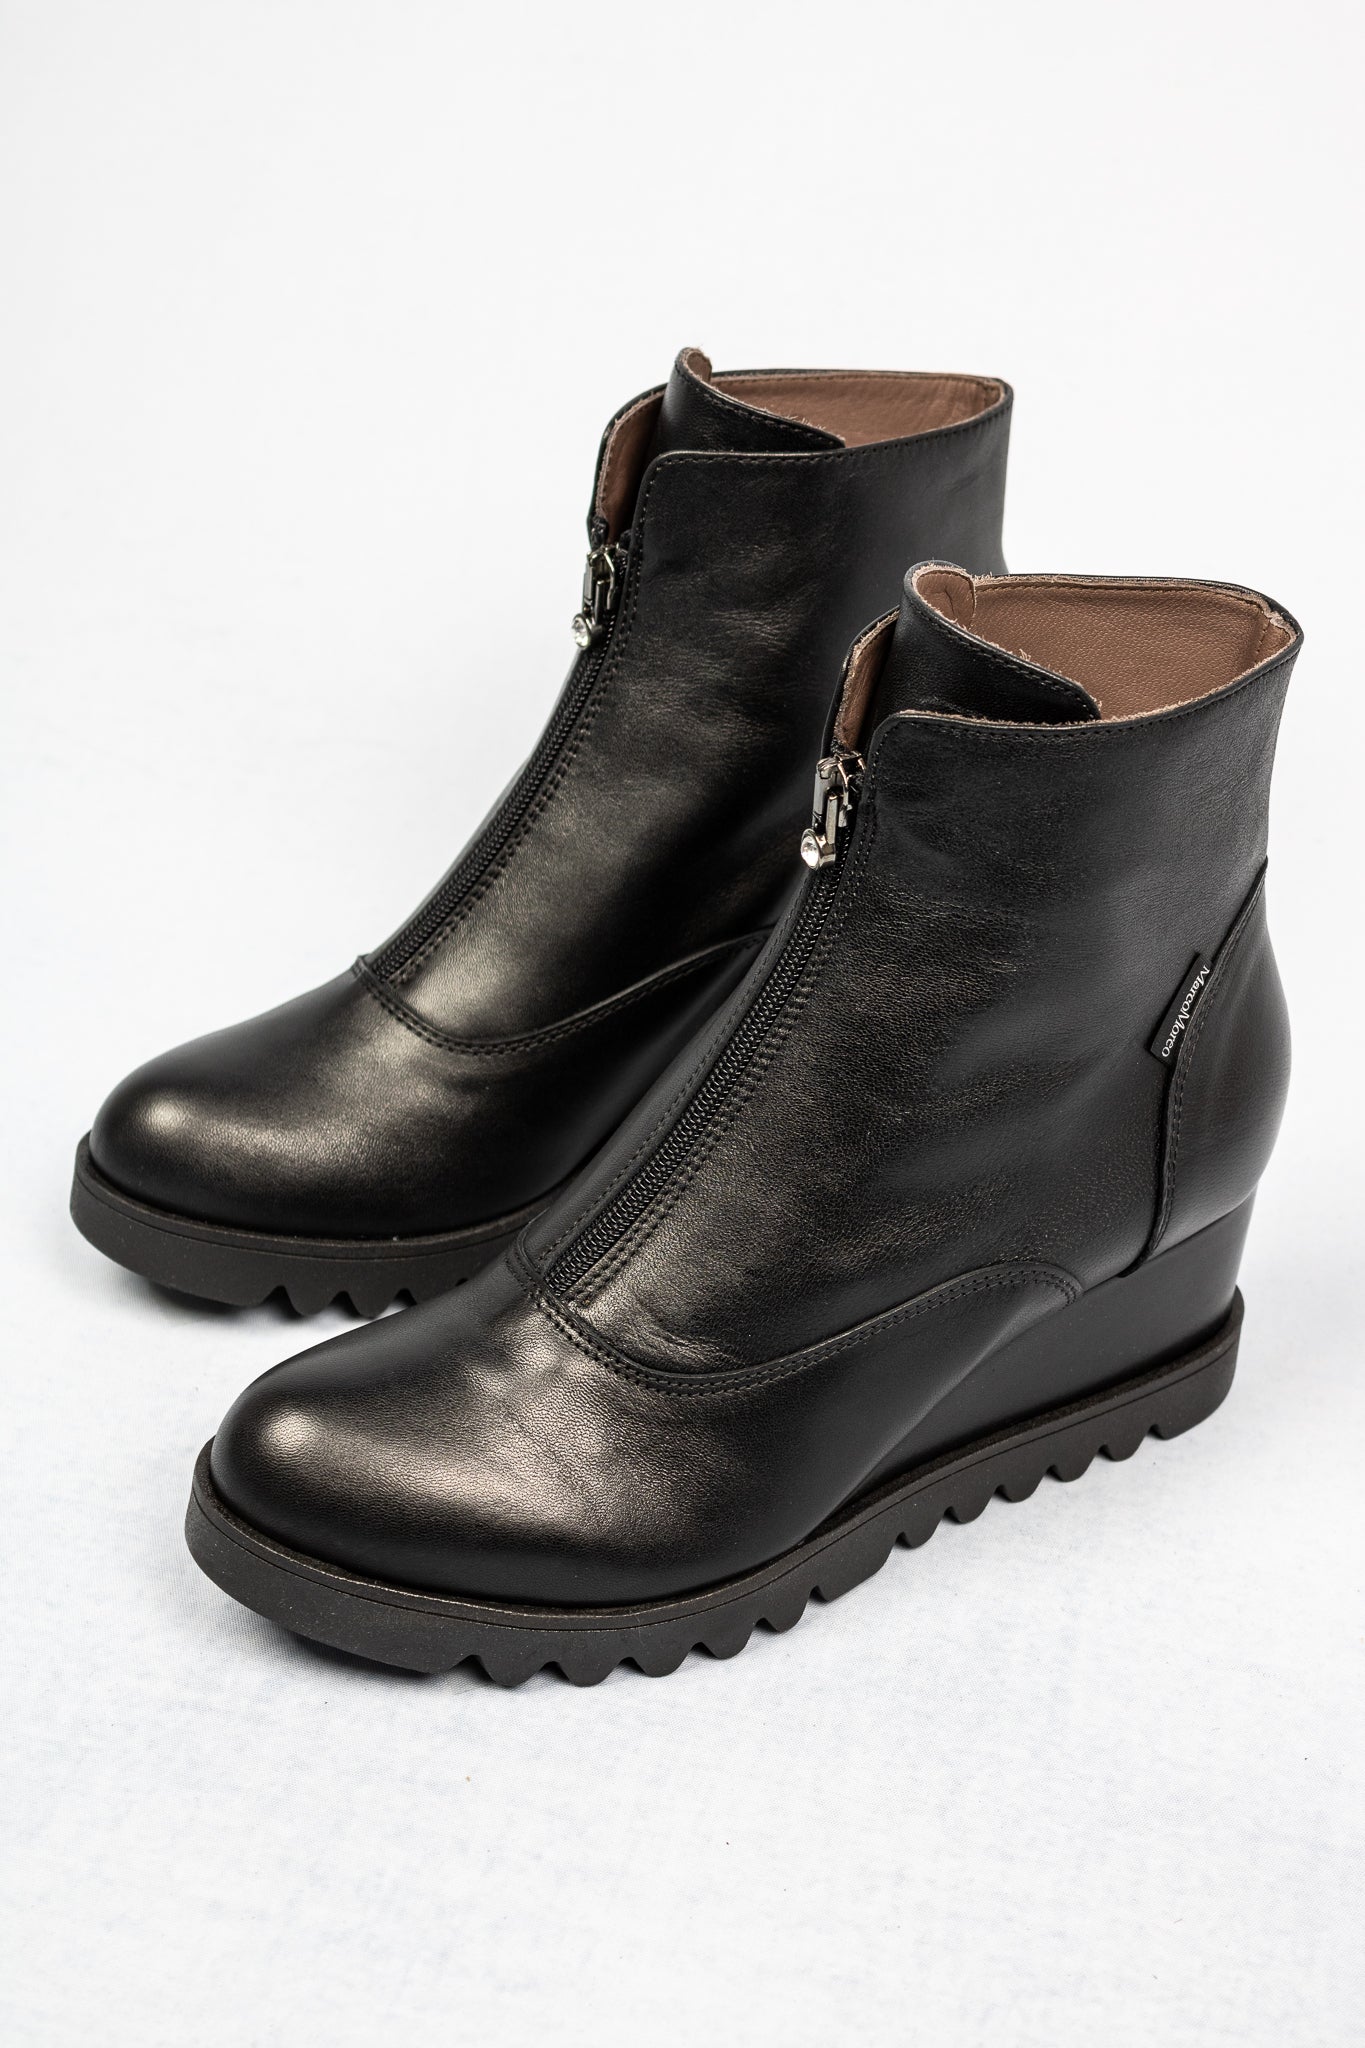 Black Leather Wedge Heel Ankle Boots 